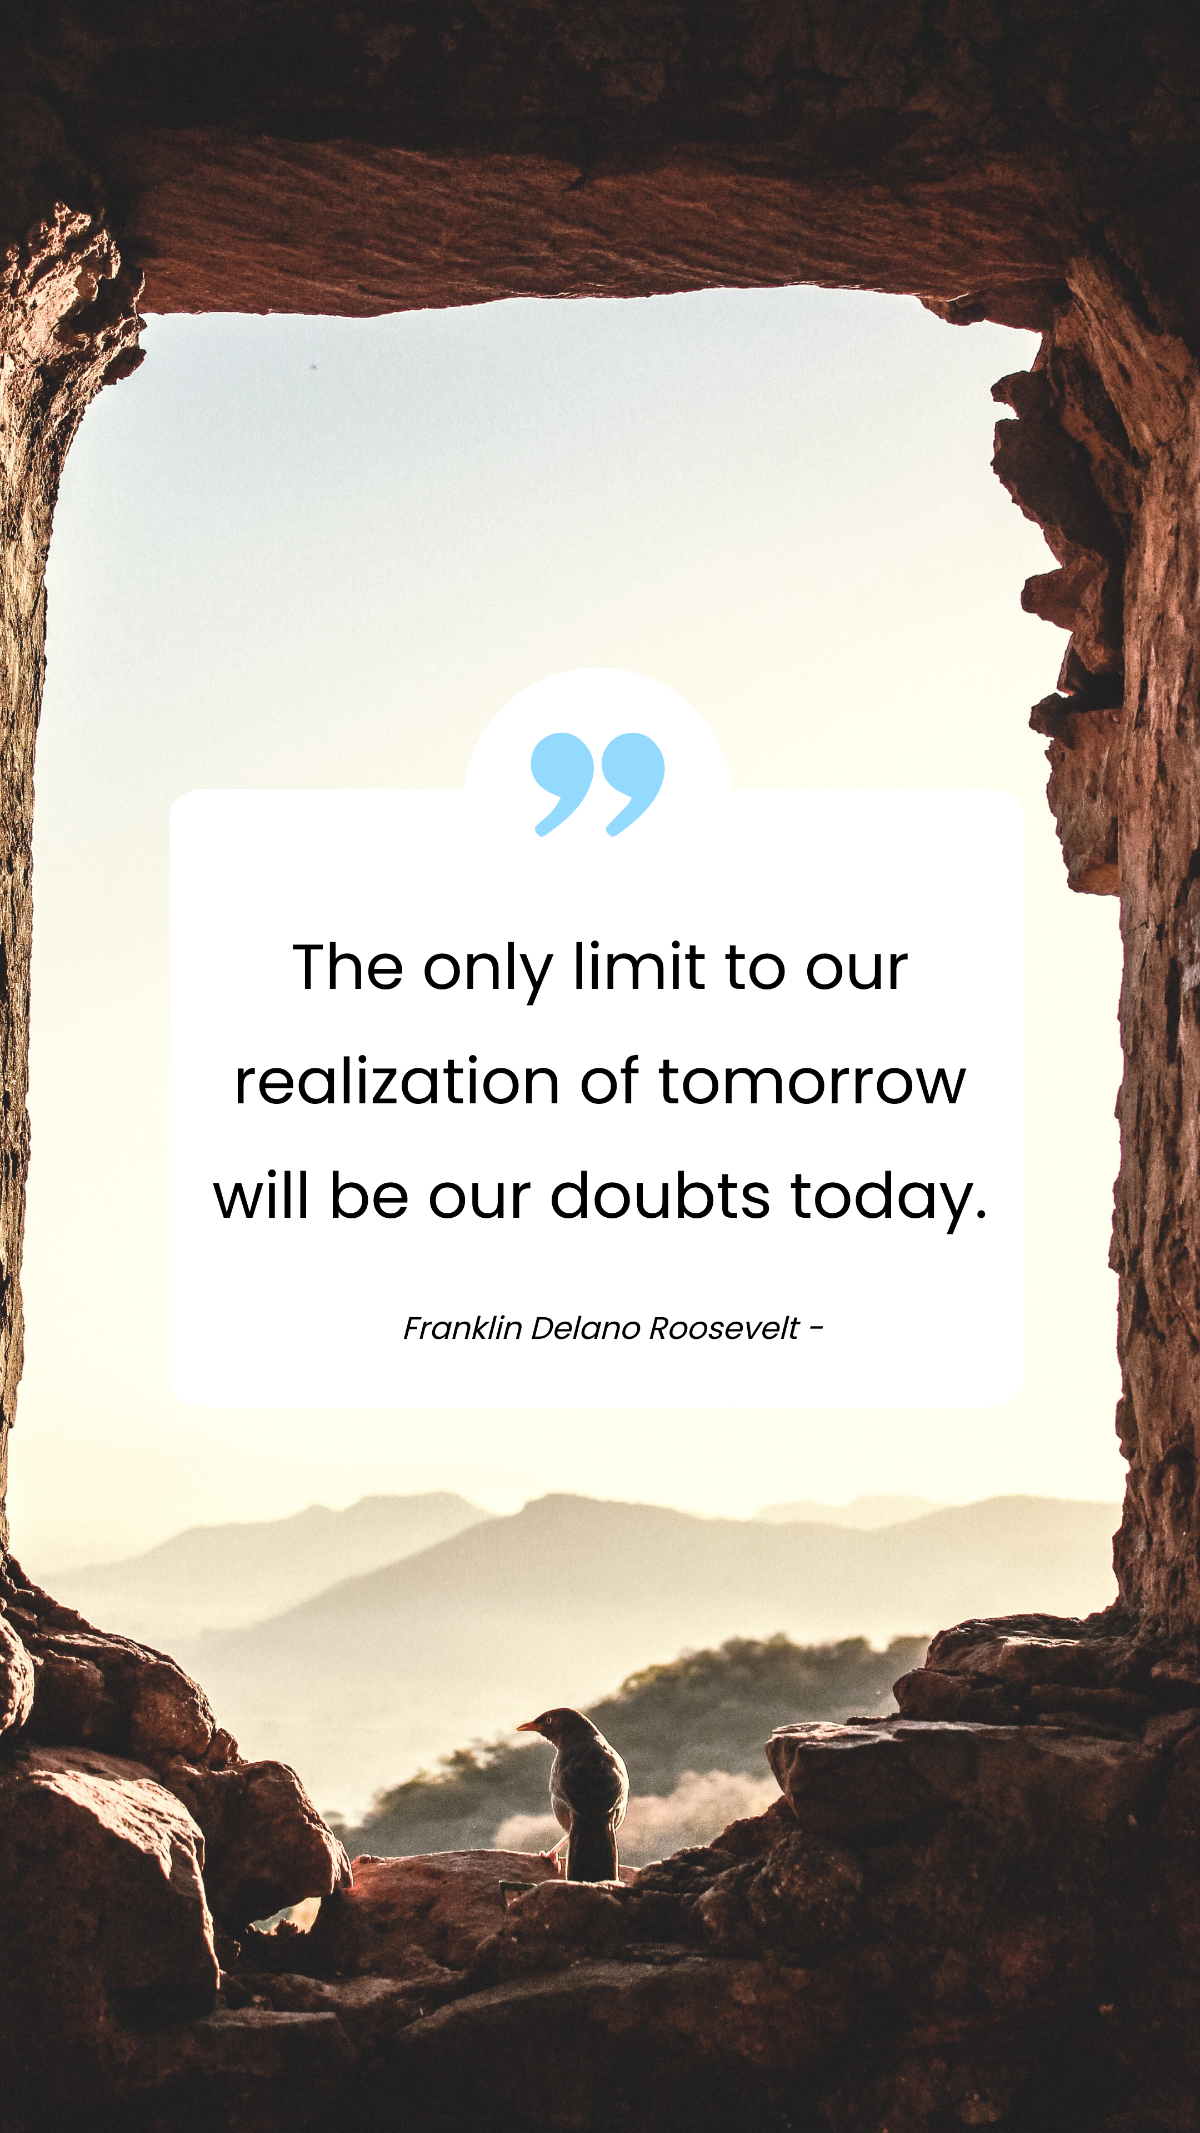 Franklin Delano Roosevelt - The only limit to our realization of tomorrow will be our doubts today. Template